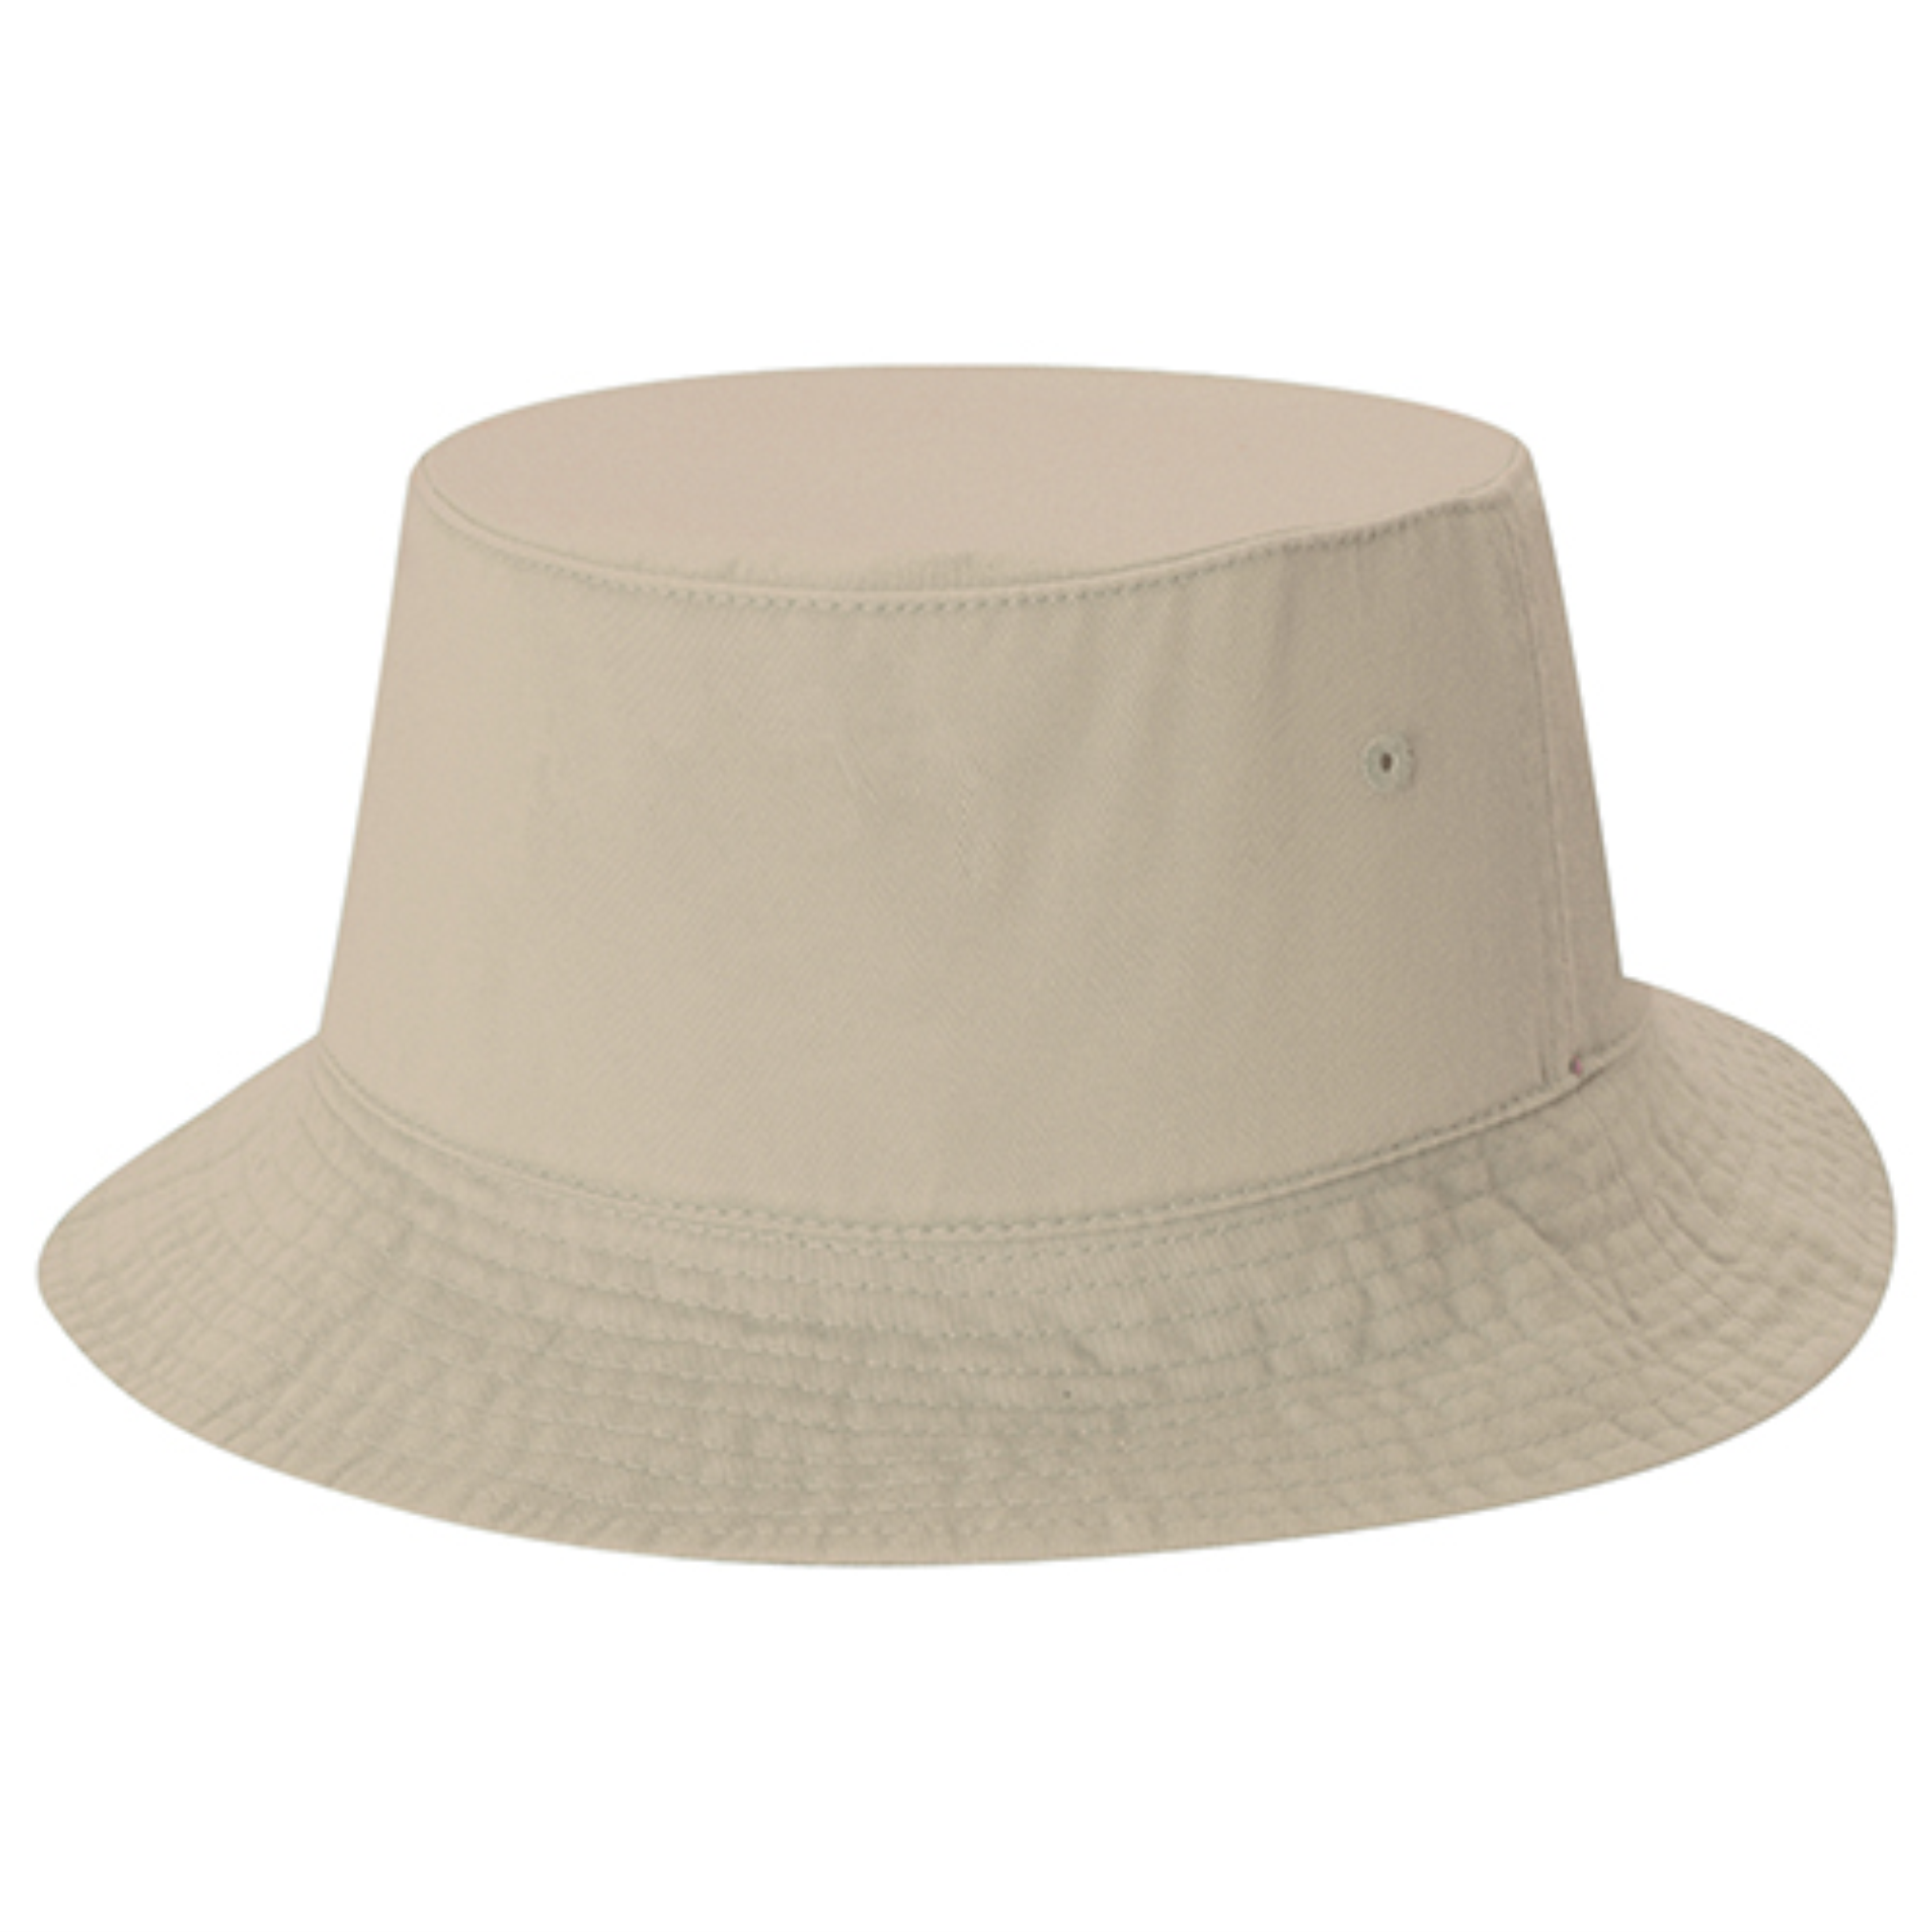 Youth Cotton Drill Deluxe Style Bucket Hat - AJM 6B100Y